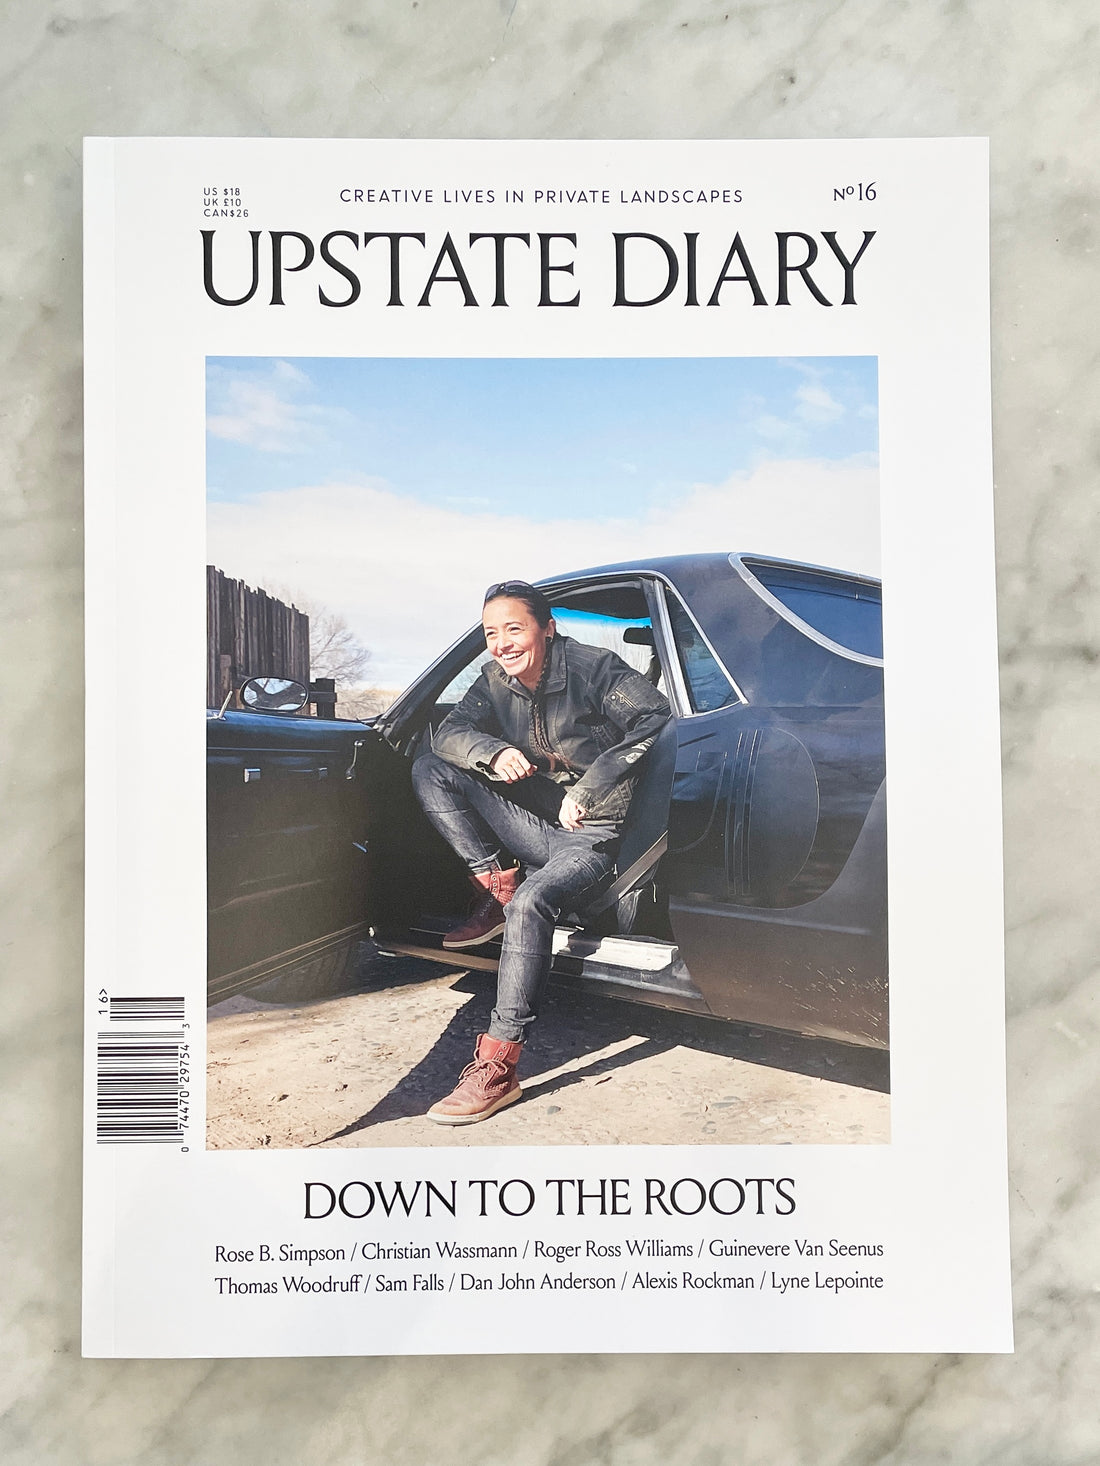 Upstate Diary: Issue 16 Down to the Roots